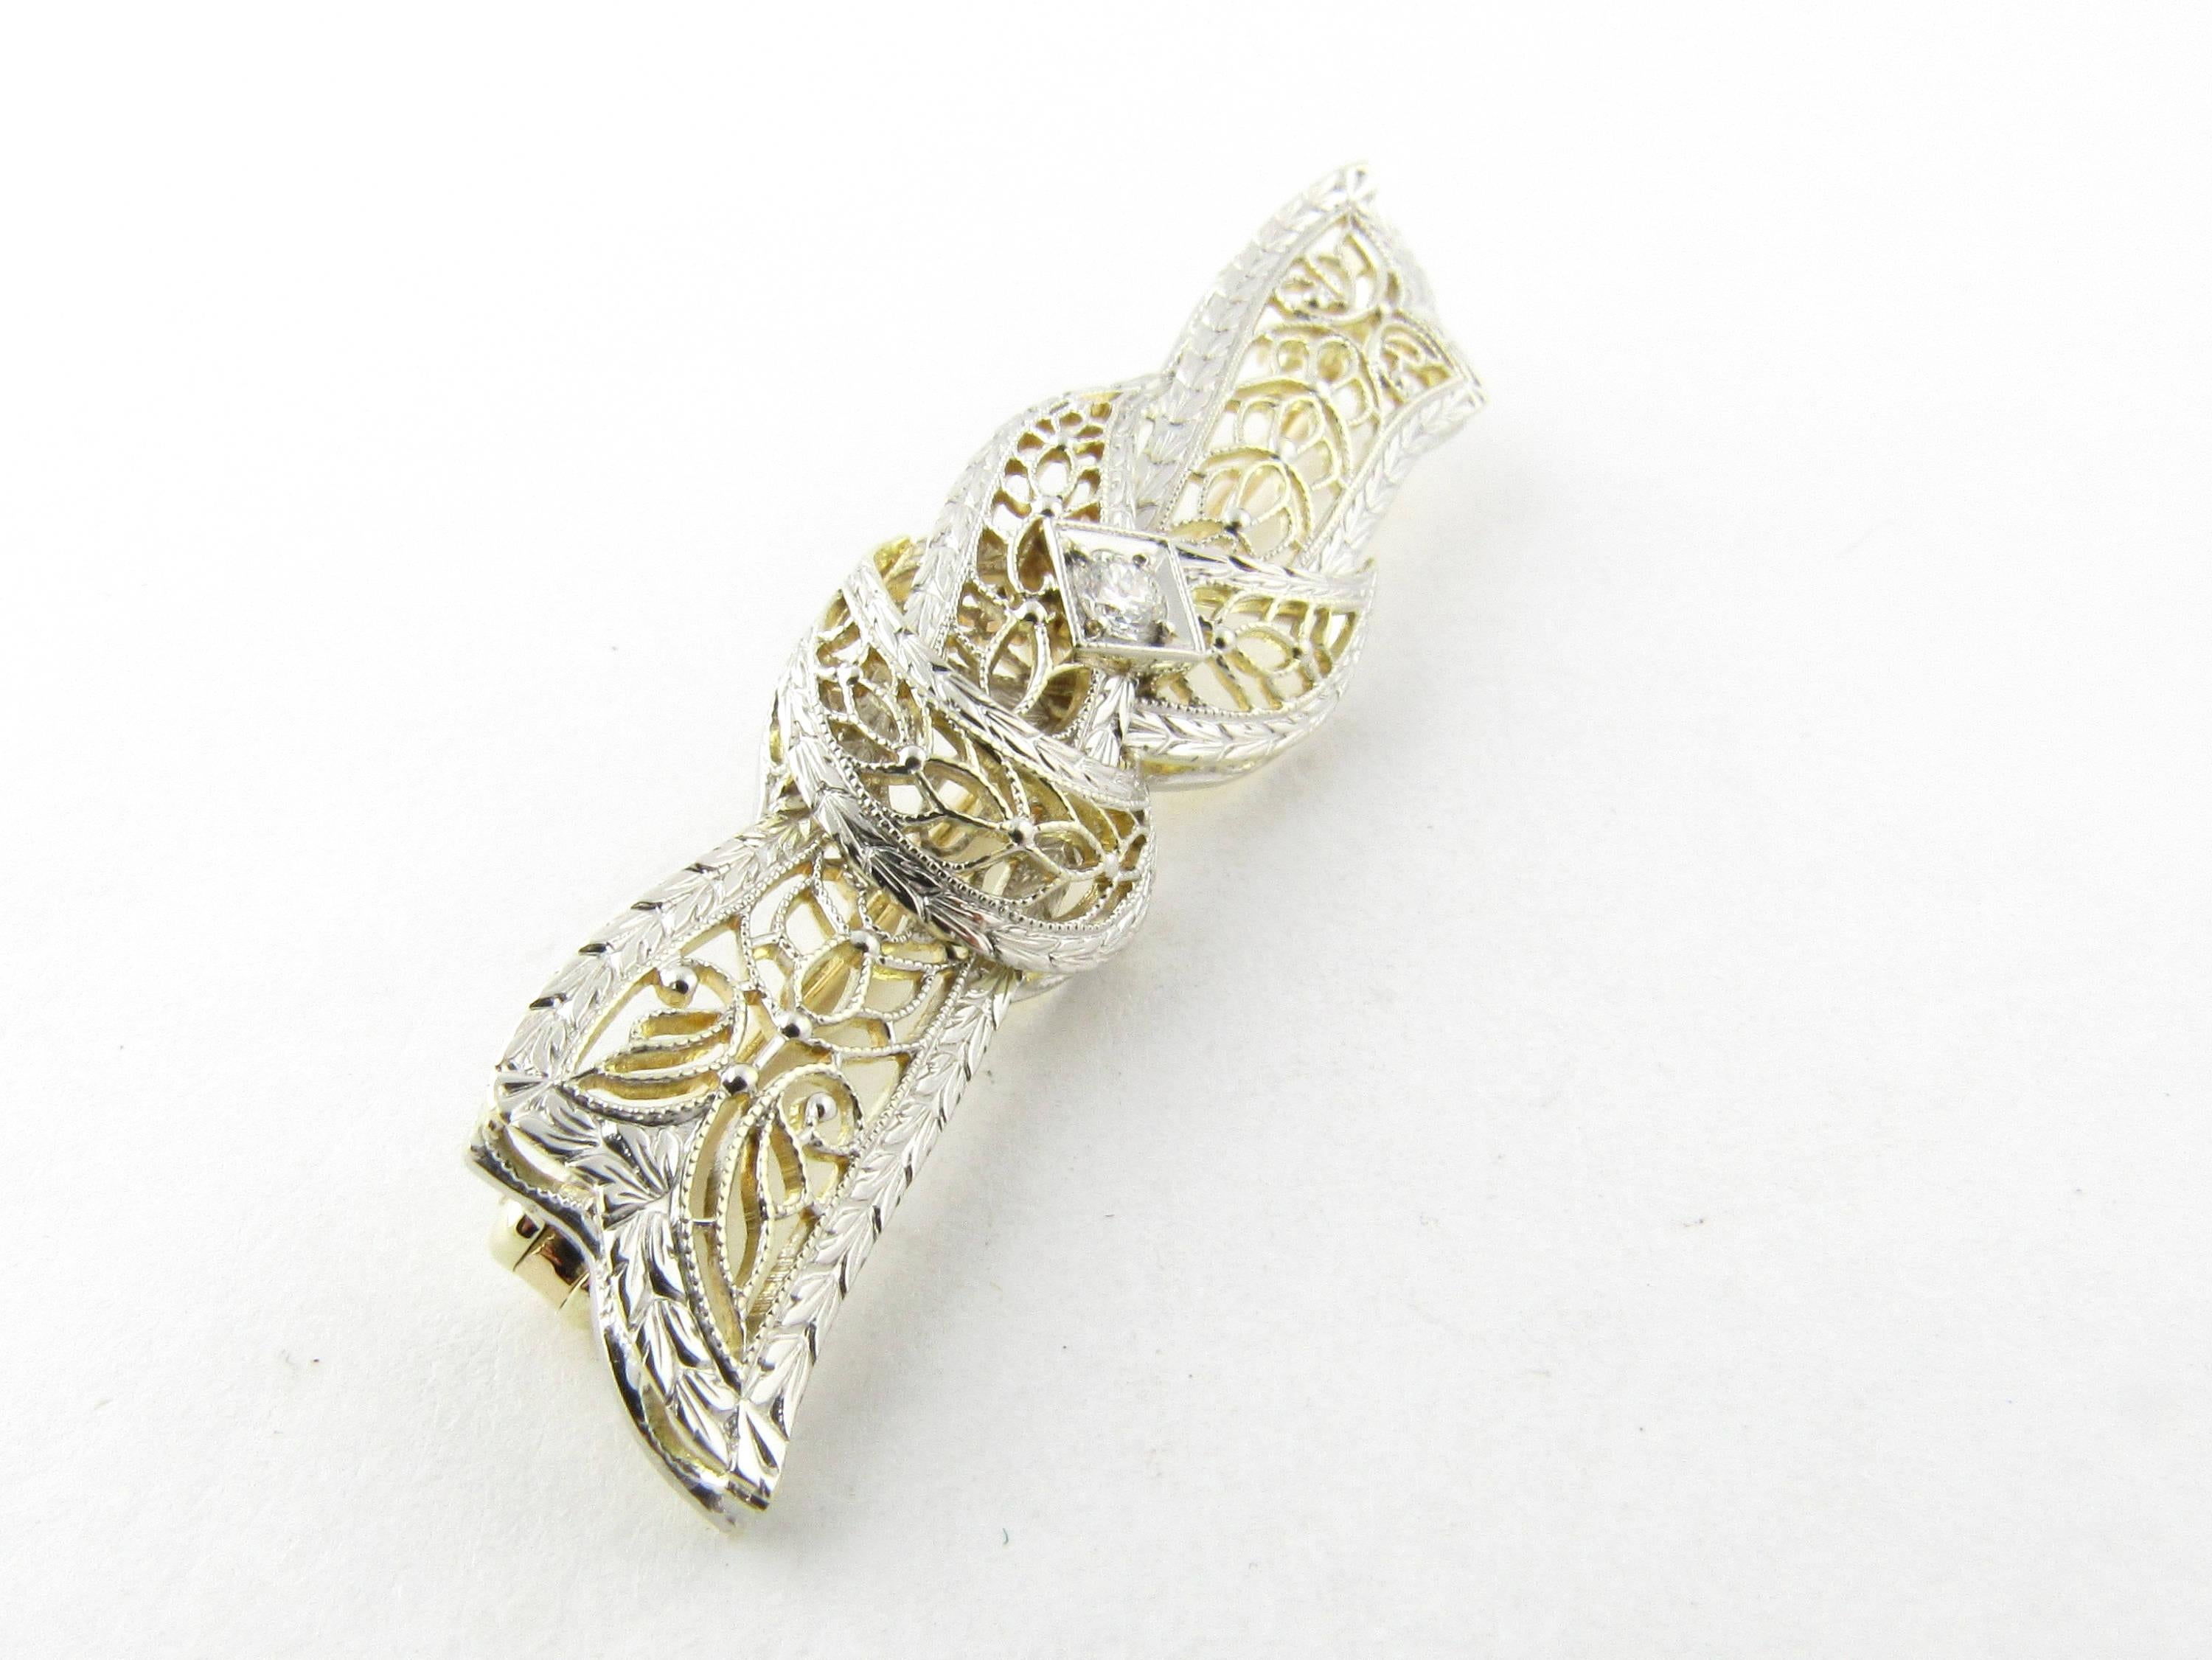 Round Cut 14 Karat White and Yellow Gold and Diamond Brooch or Pin